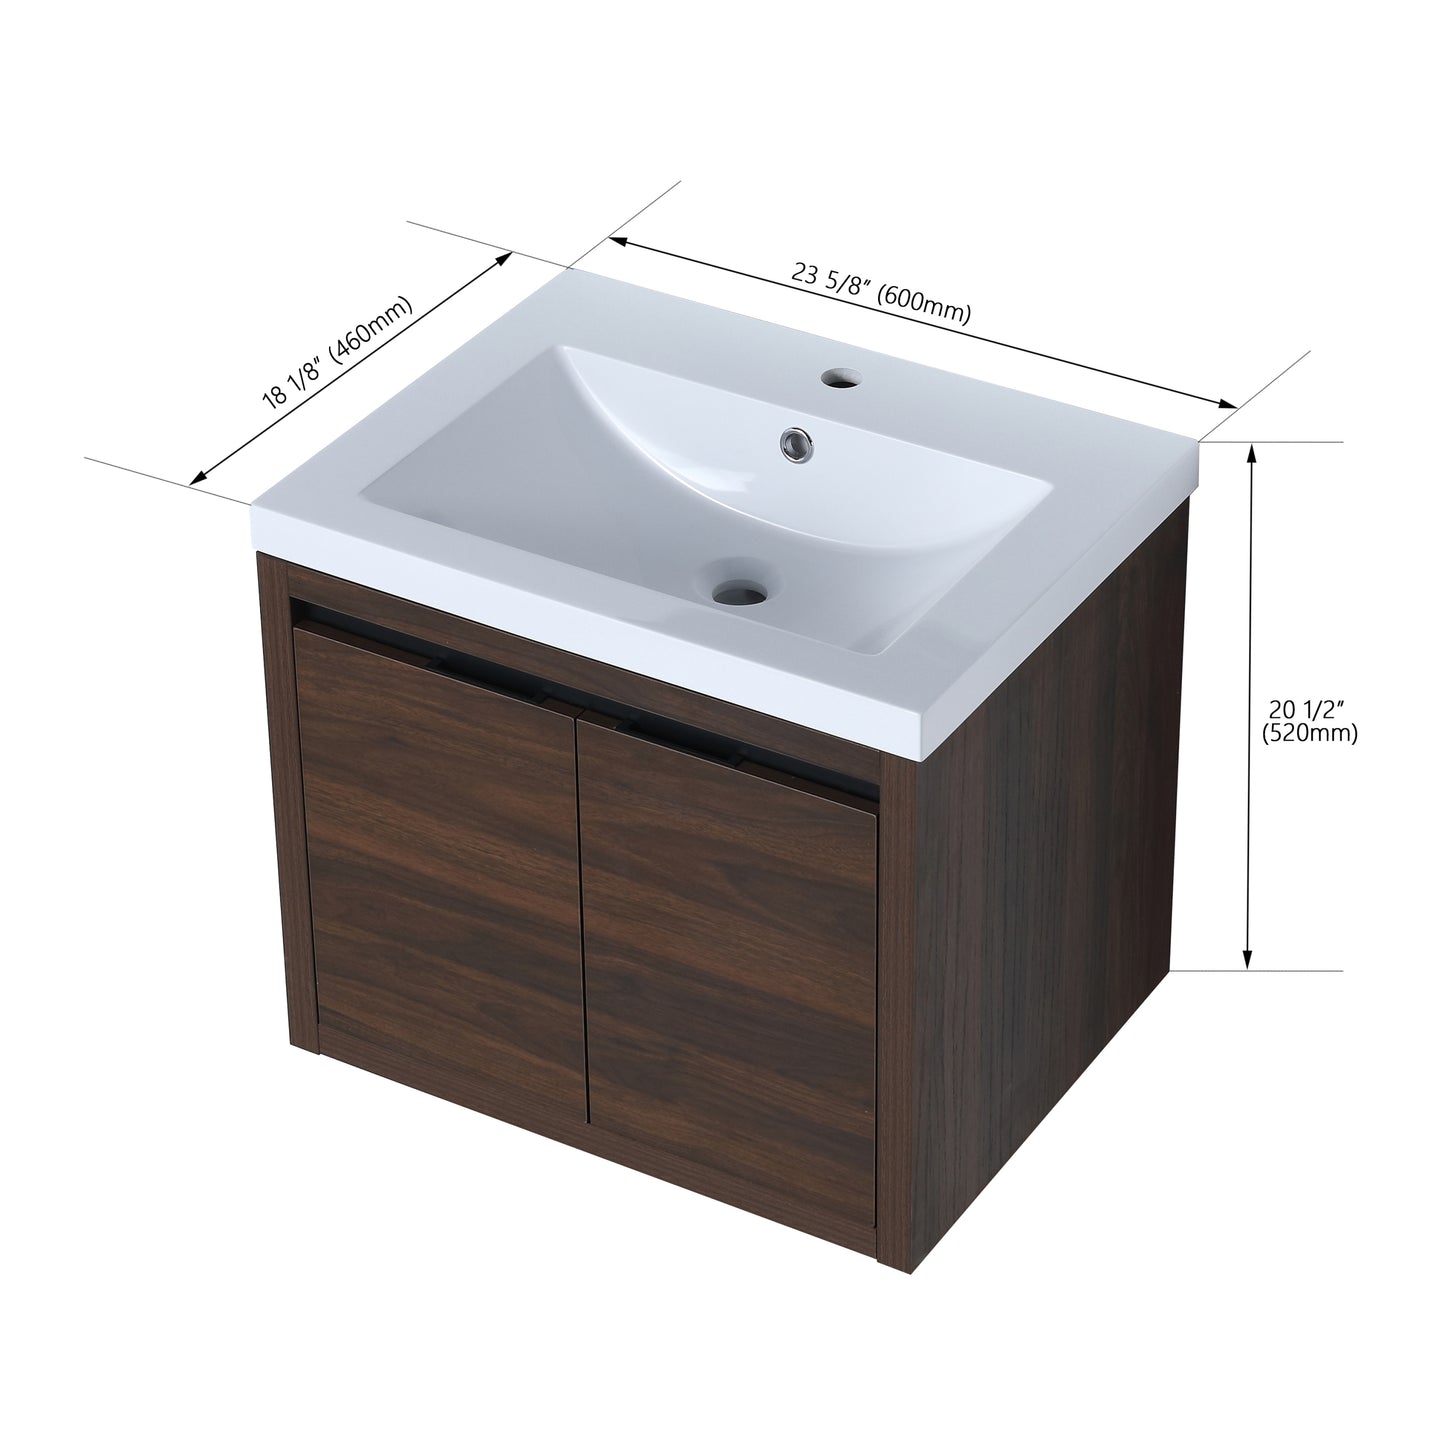 Bathroom Cabinet With Sink,Soft Close Doors,Float Mounting Design,24 Inch For Small Bathroom,24x18KD-Packing）